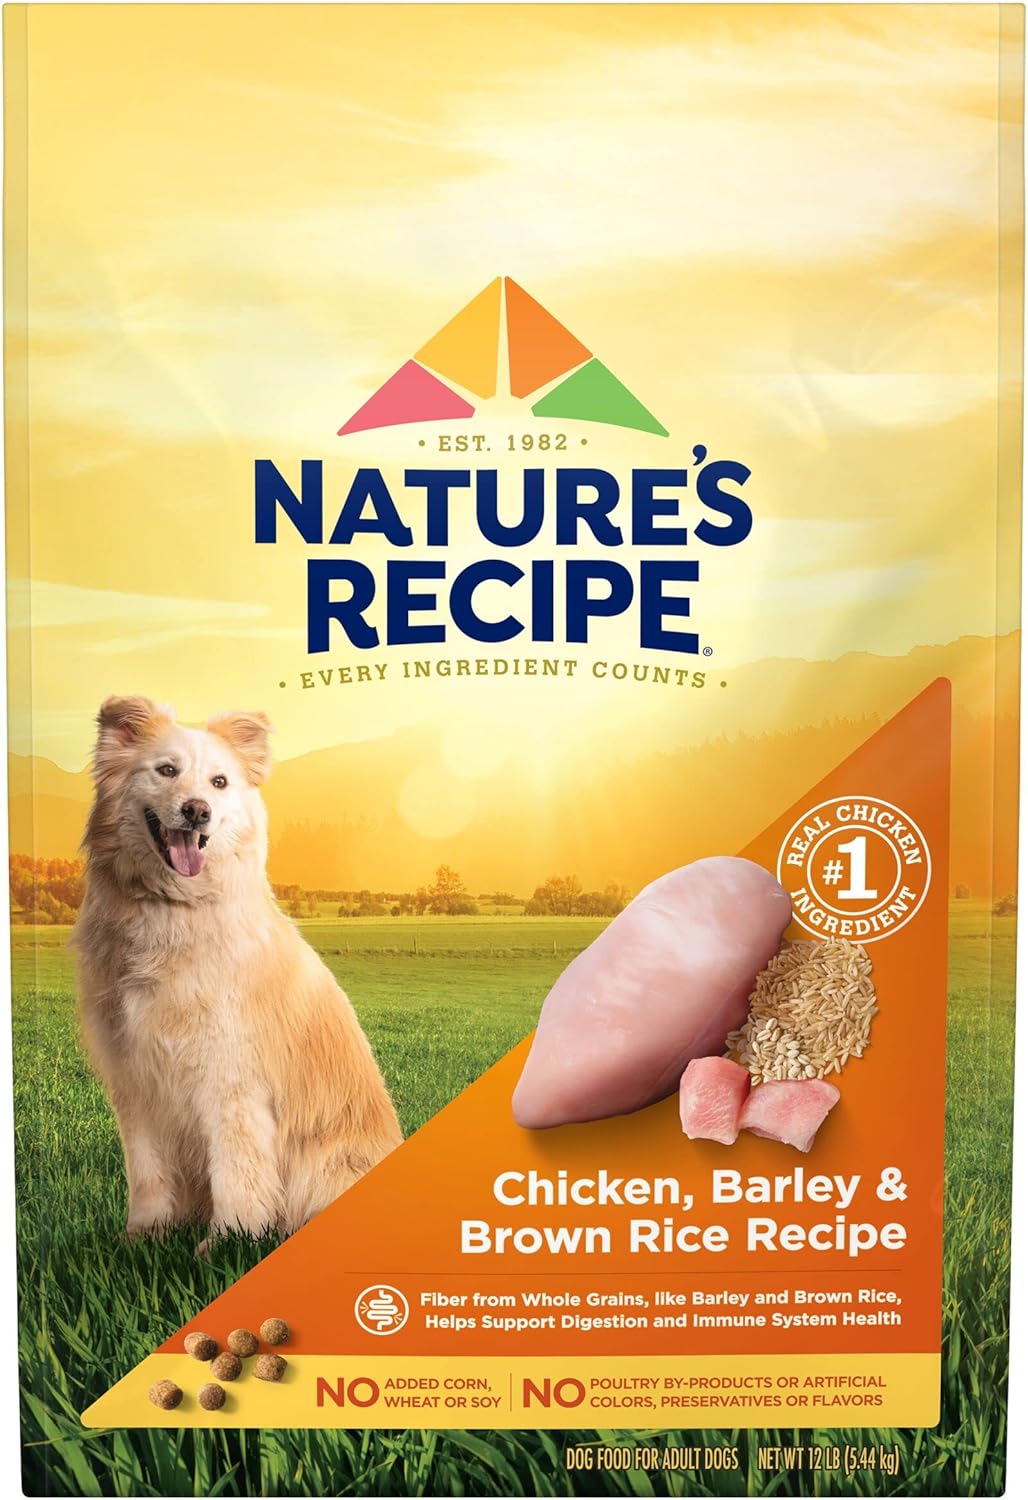 Nature’s Recipe Original Dry Dog Food for Adult Dogs, Chicken & Rice Recipe, 12 lb Bag